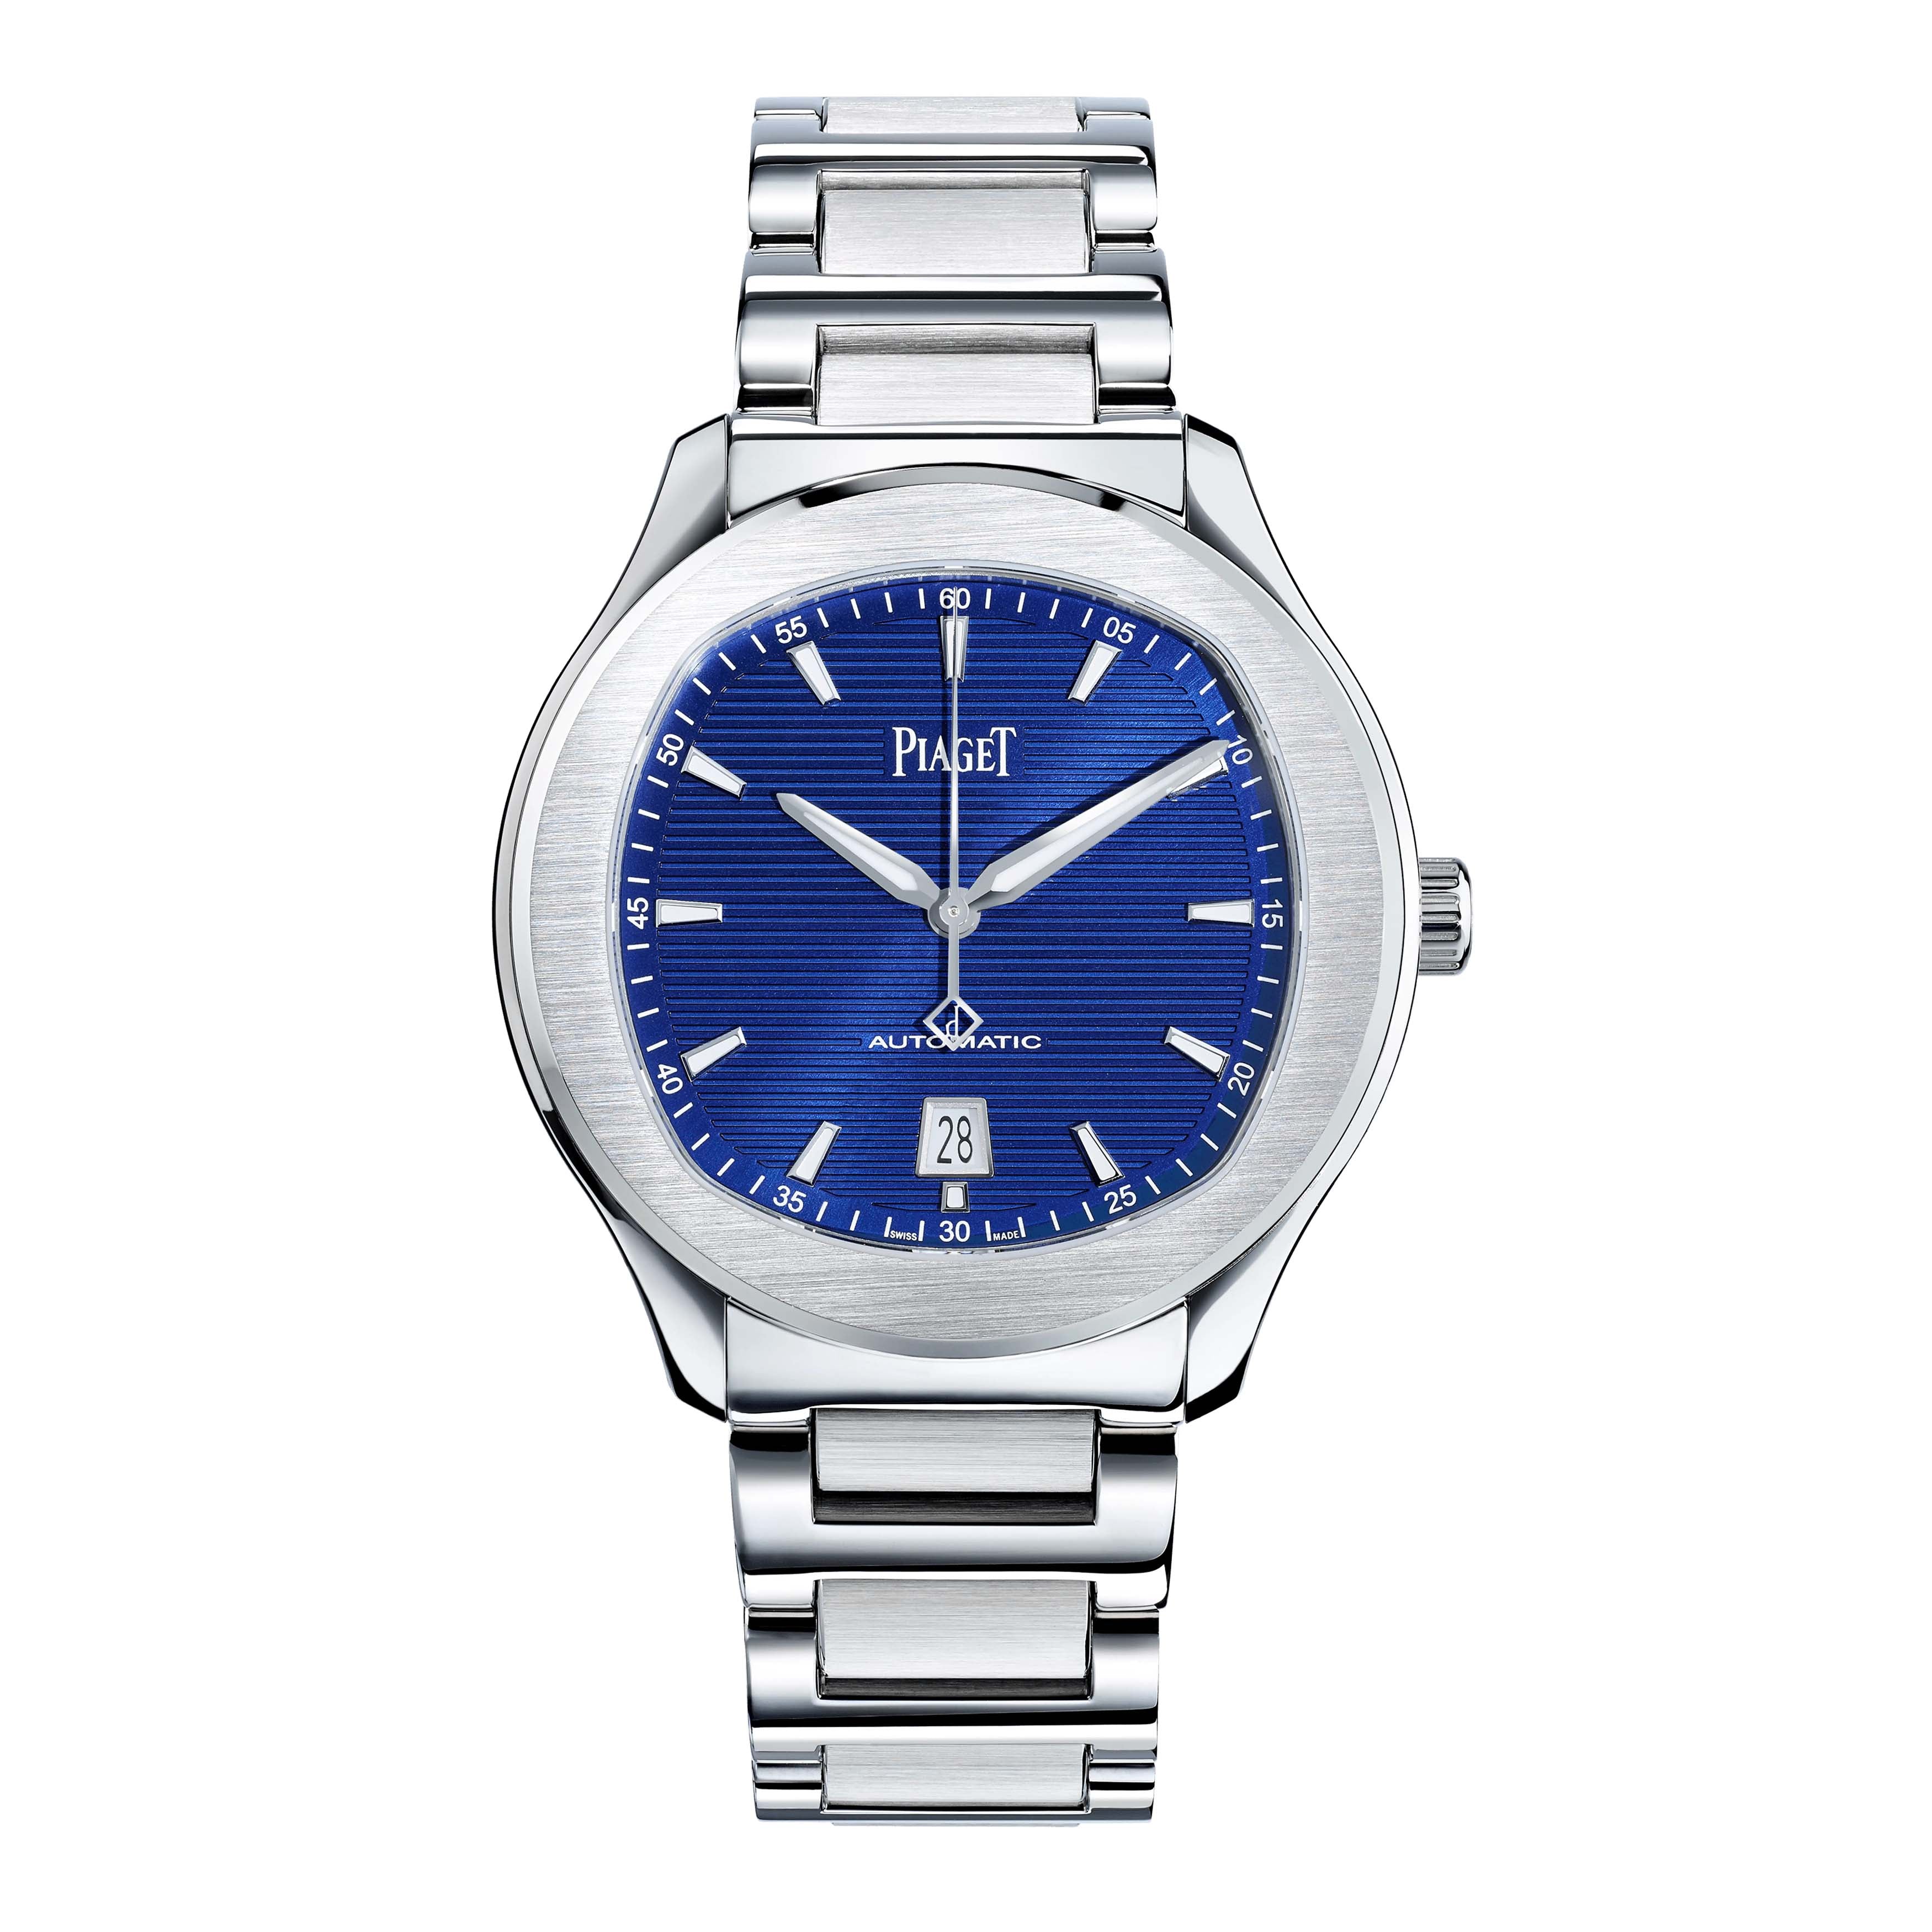 Piaget Polo Date Watch, 42mm Blue Dial, G0A41002